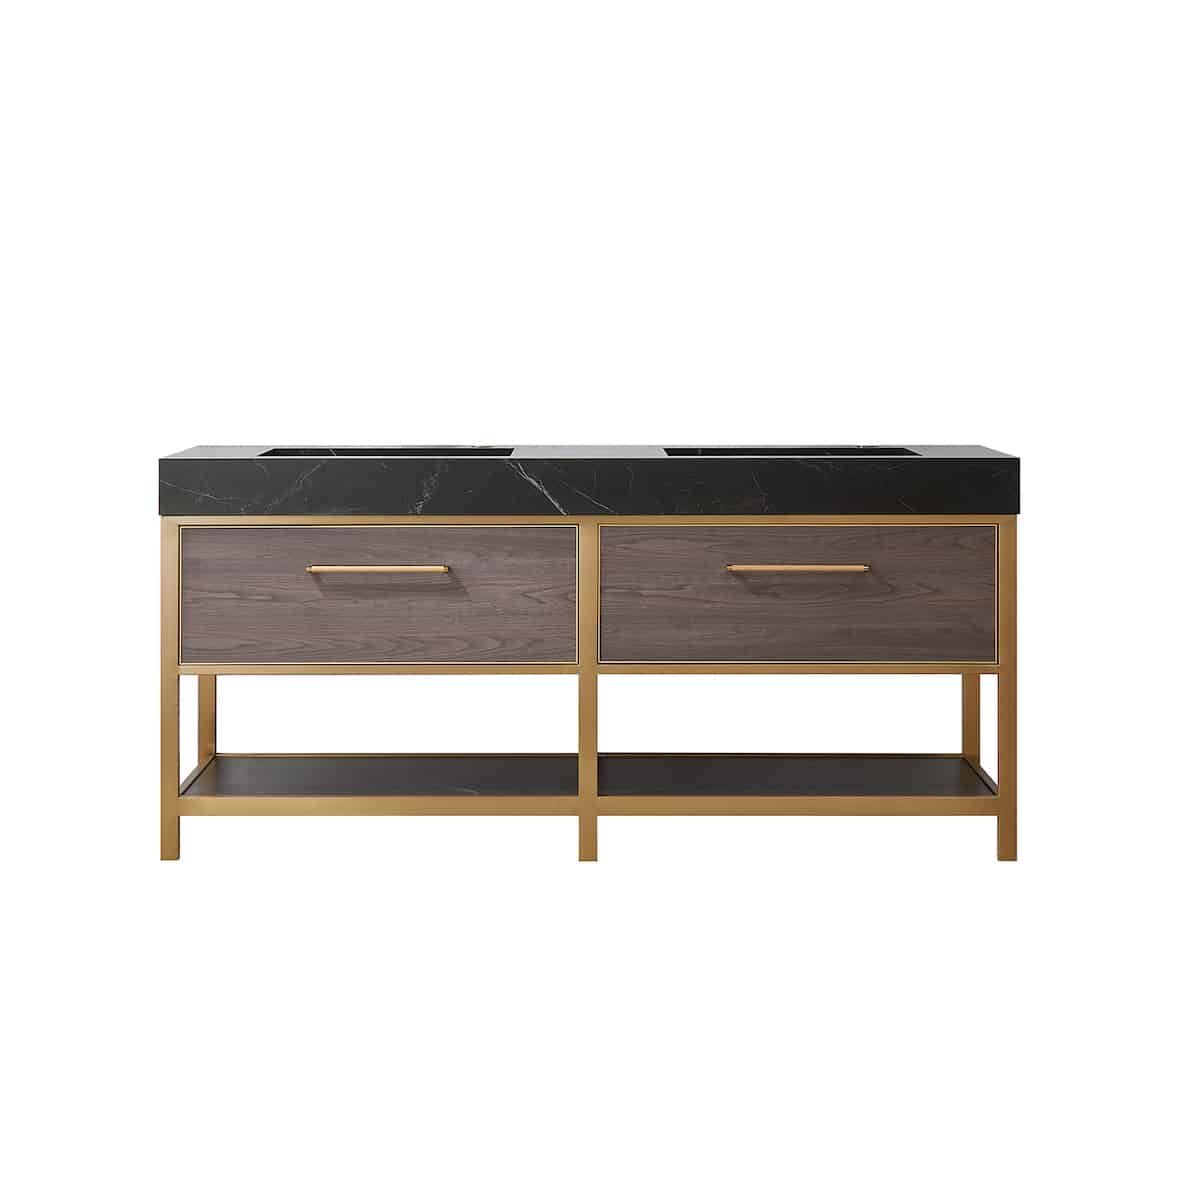 Vinnova Segovia 72 Inch Freestanding Double Sink Bath Vanity in Suleiman Oak with Black Sintered Stone Top Without Mirror 702072-SO-SL-NM #mirror_without mirror